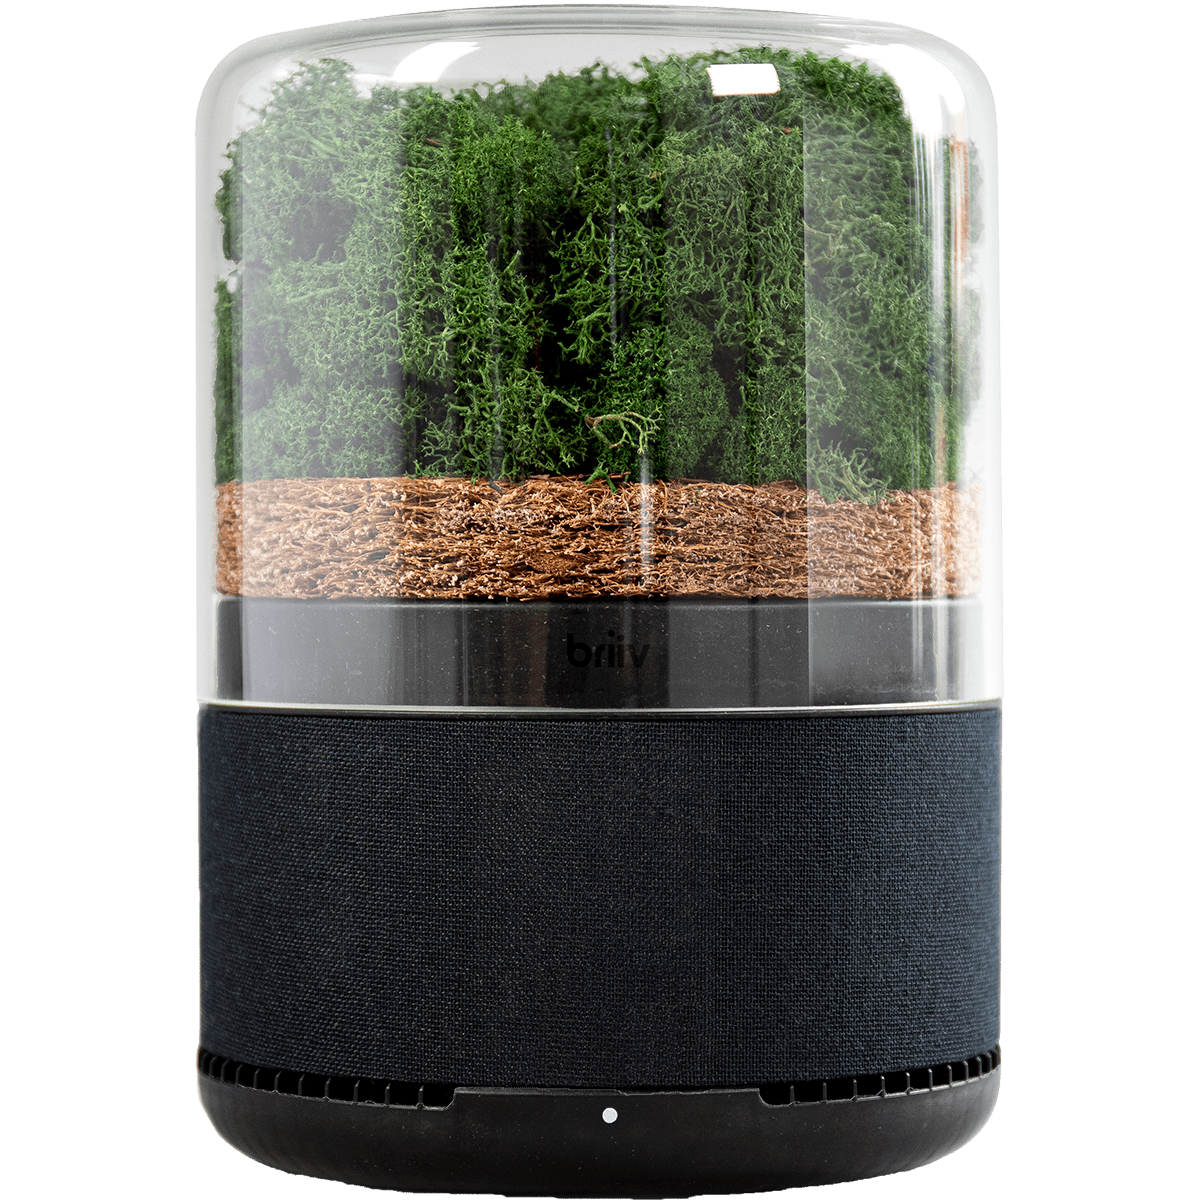 Moss Pure Live Moss Air Filter in Black